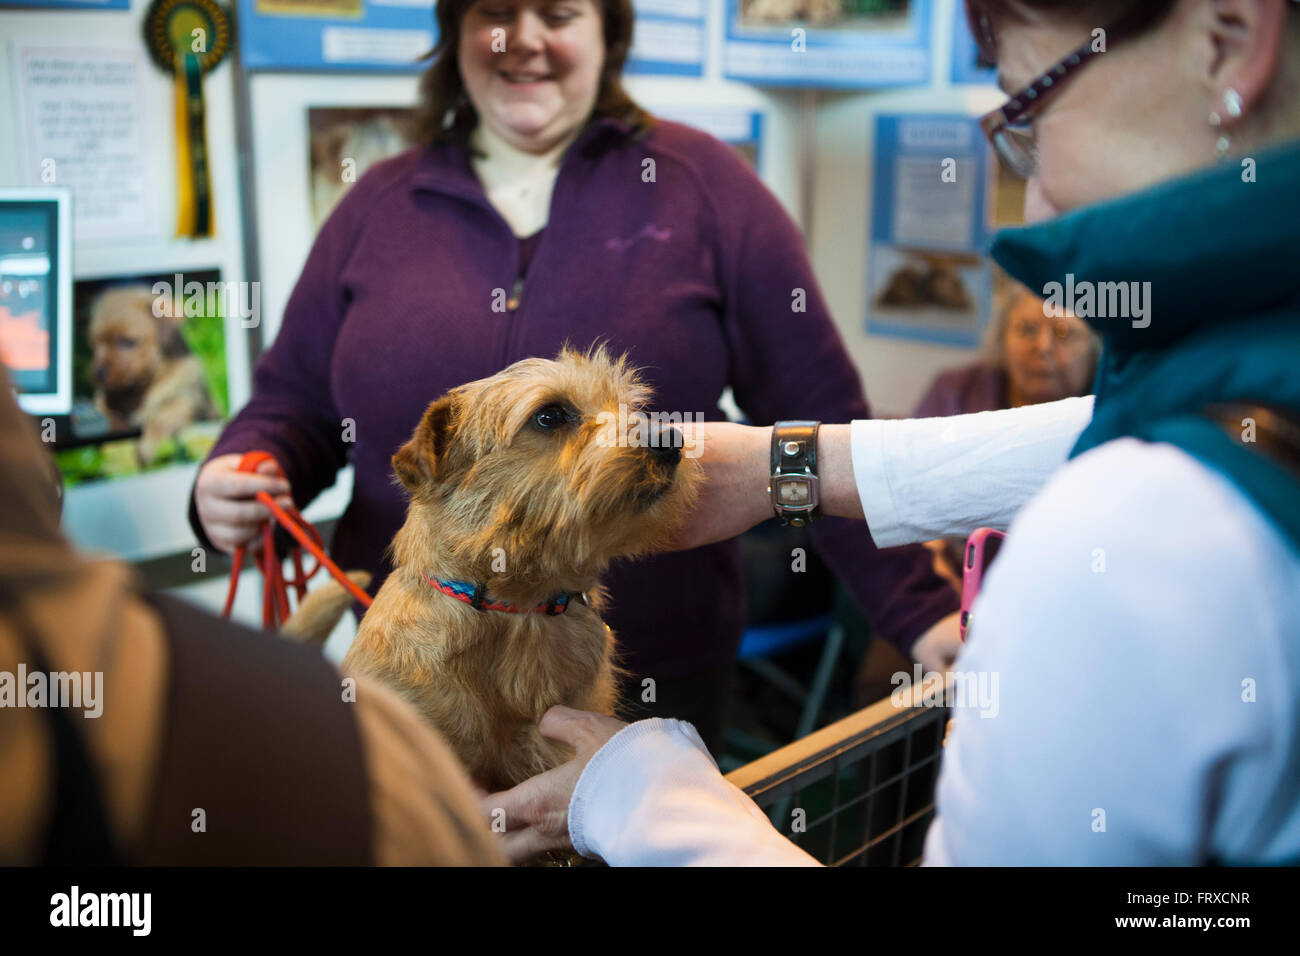 An owner at Crufts dog show in Birmingham Uk shows off her terrier to the public. Stock Photo